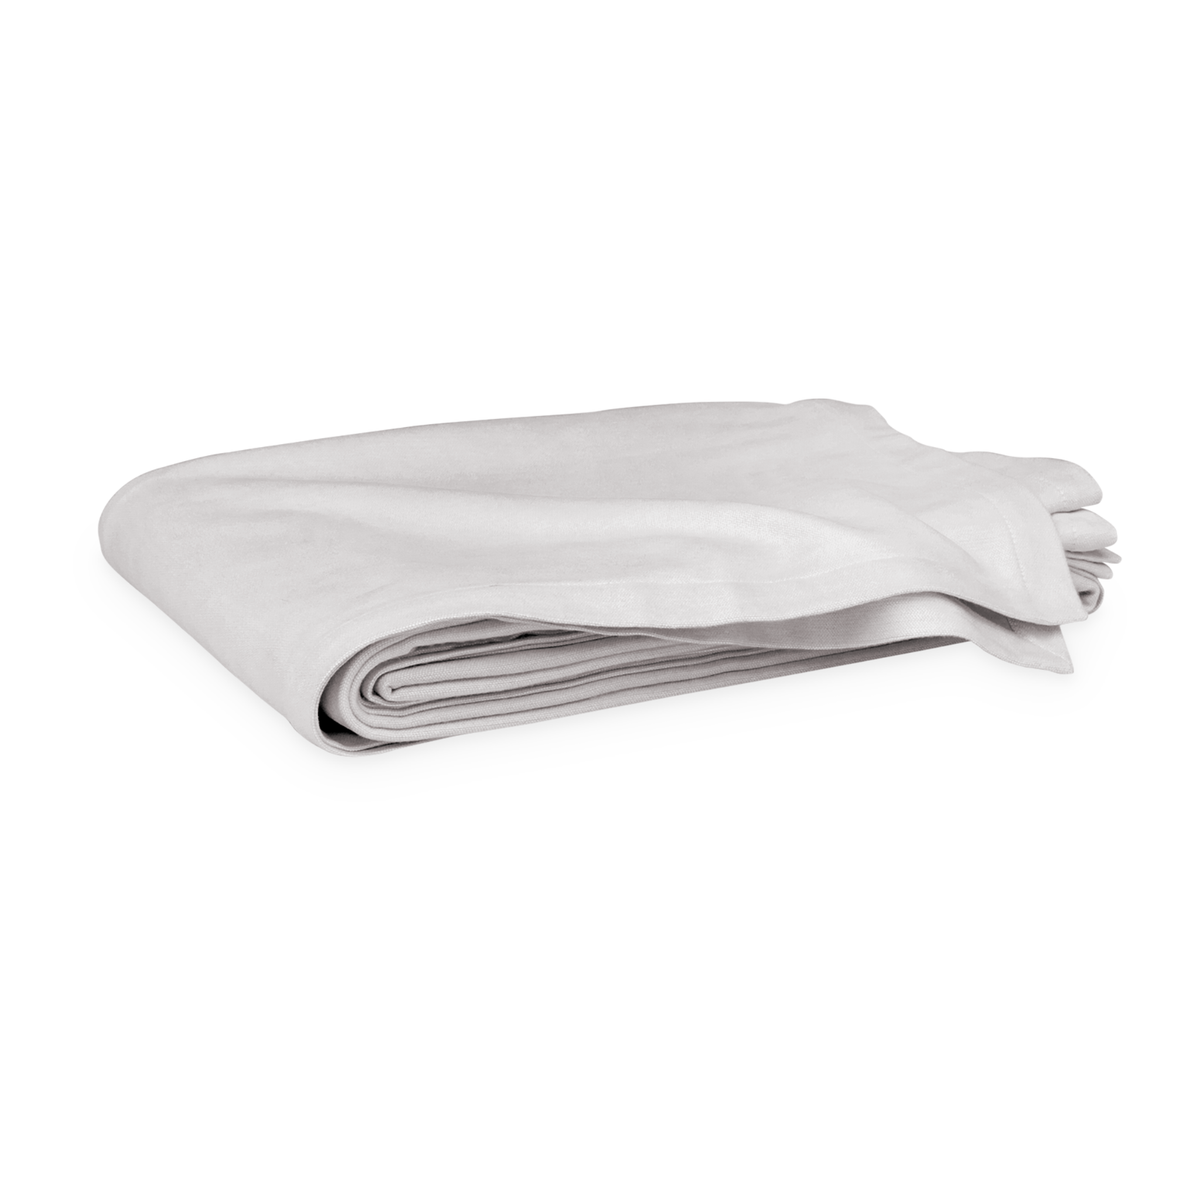 Folded Blanket of Matouk Dream Modal Collection in Silver Color